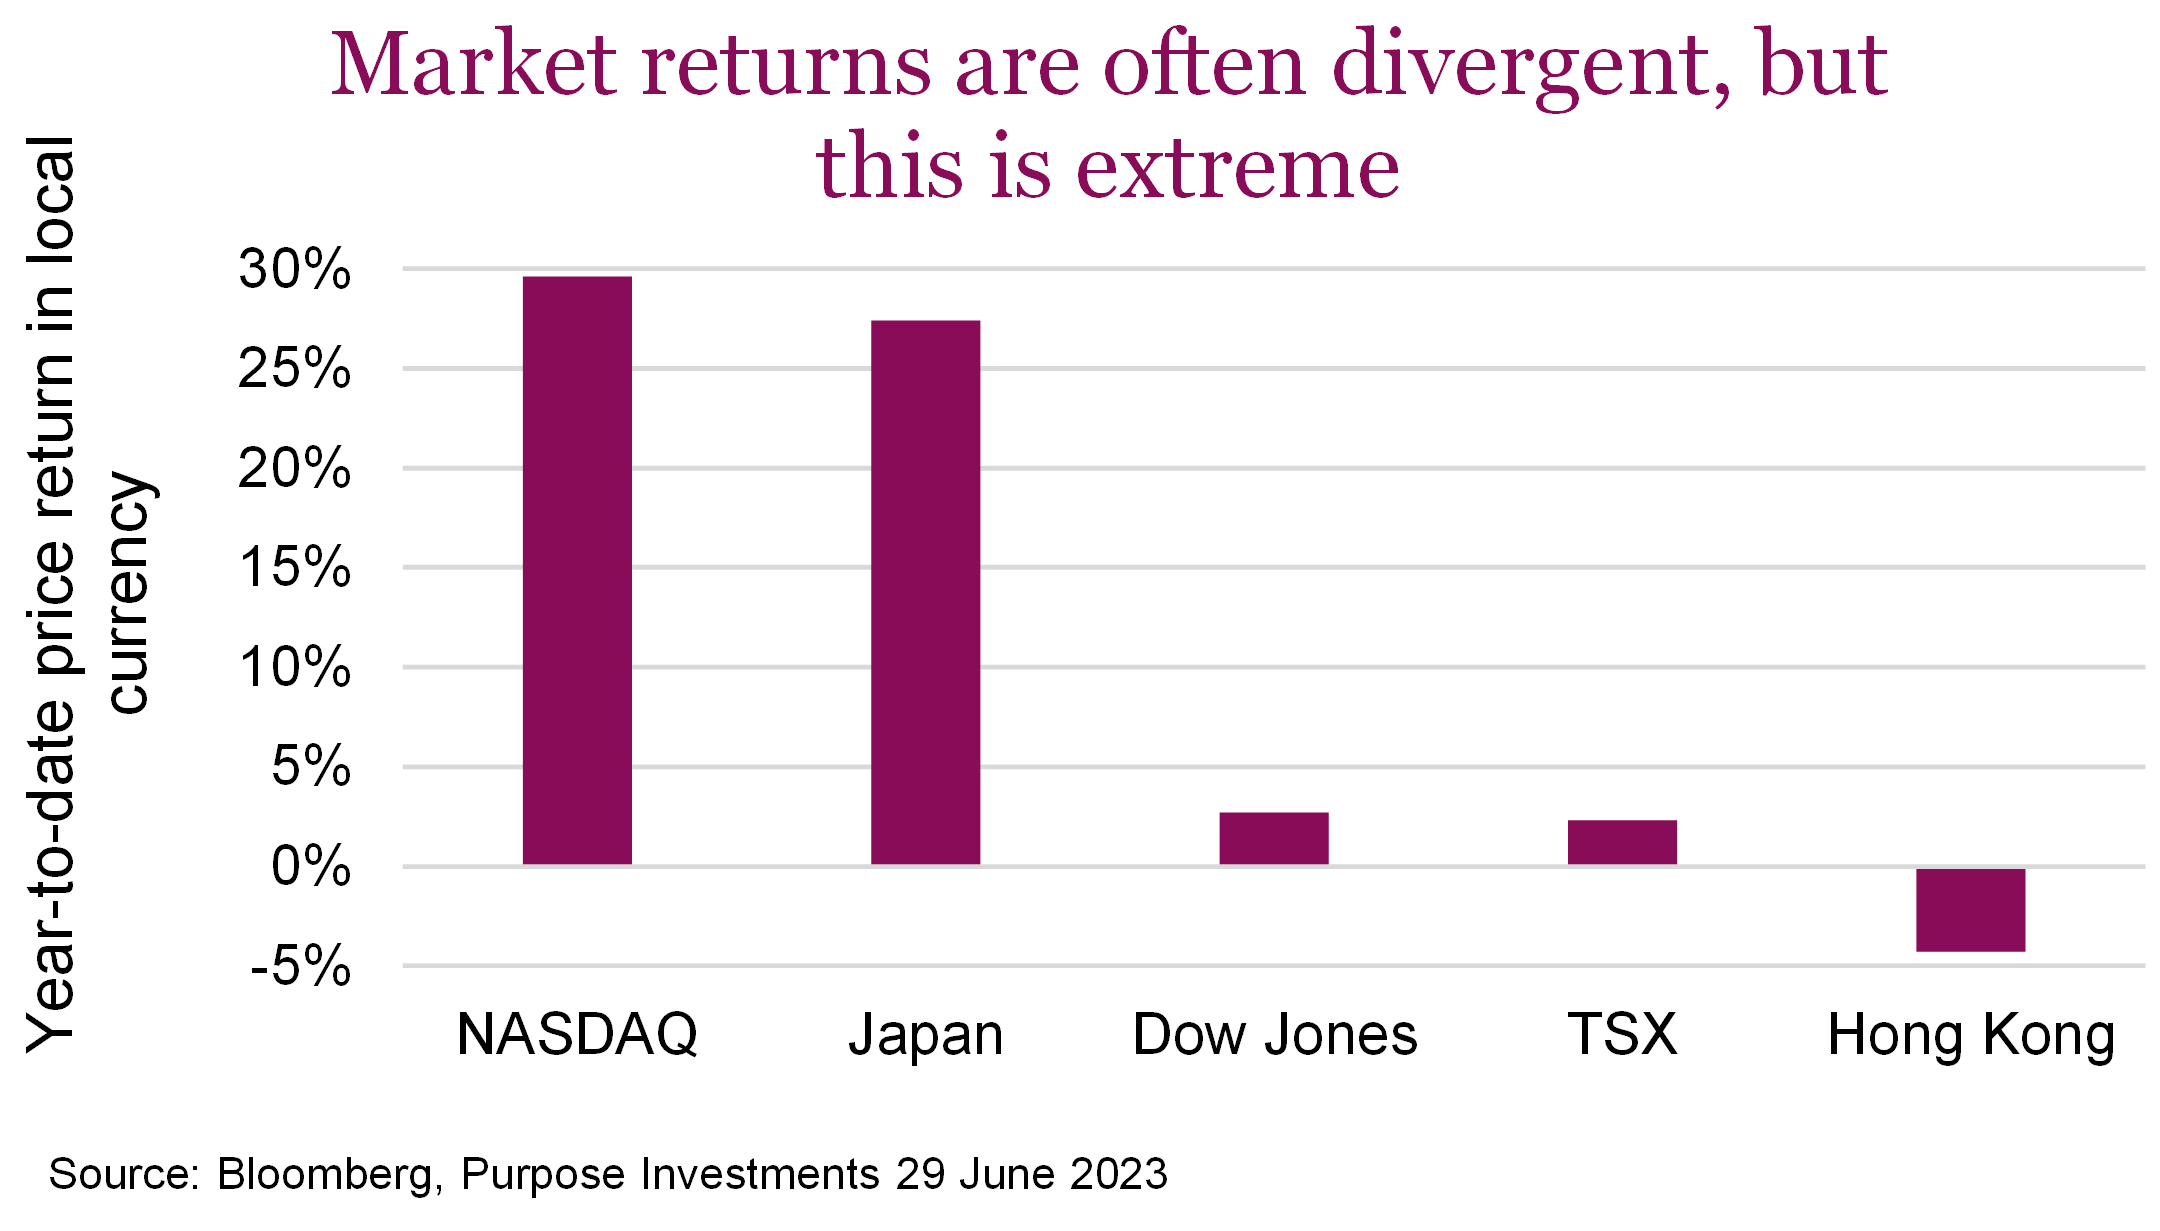 Market returns are often divergent, but this is extreme